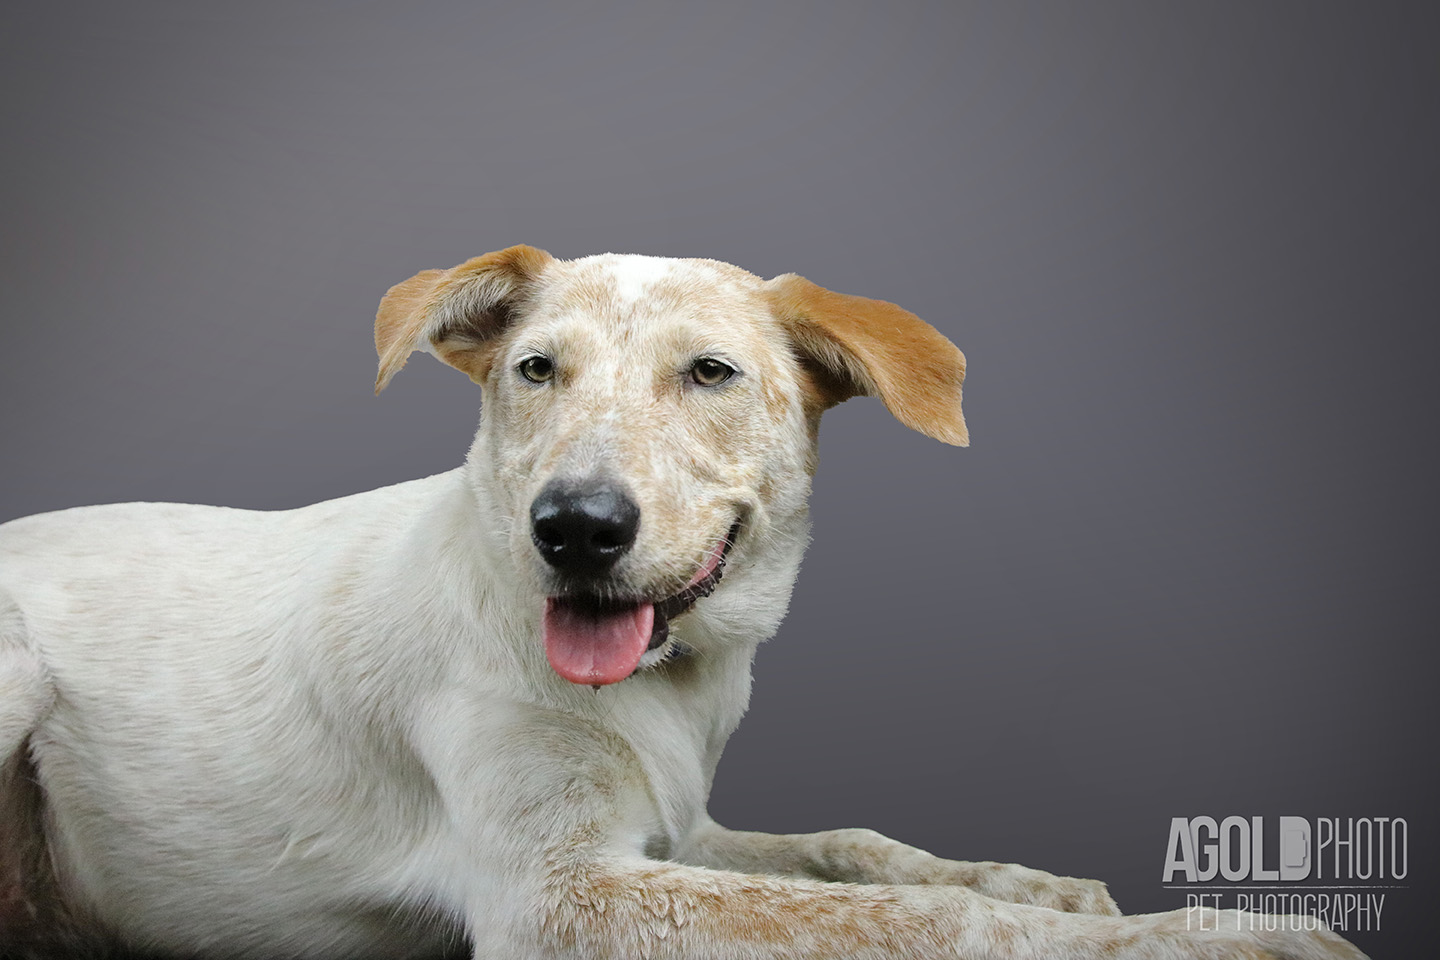 riley_agoldphoto-tampa-pet-photography__agoldphoto-tampa-pet-photography_